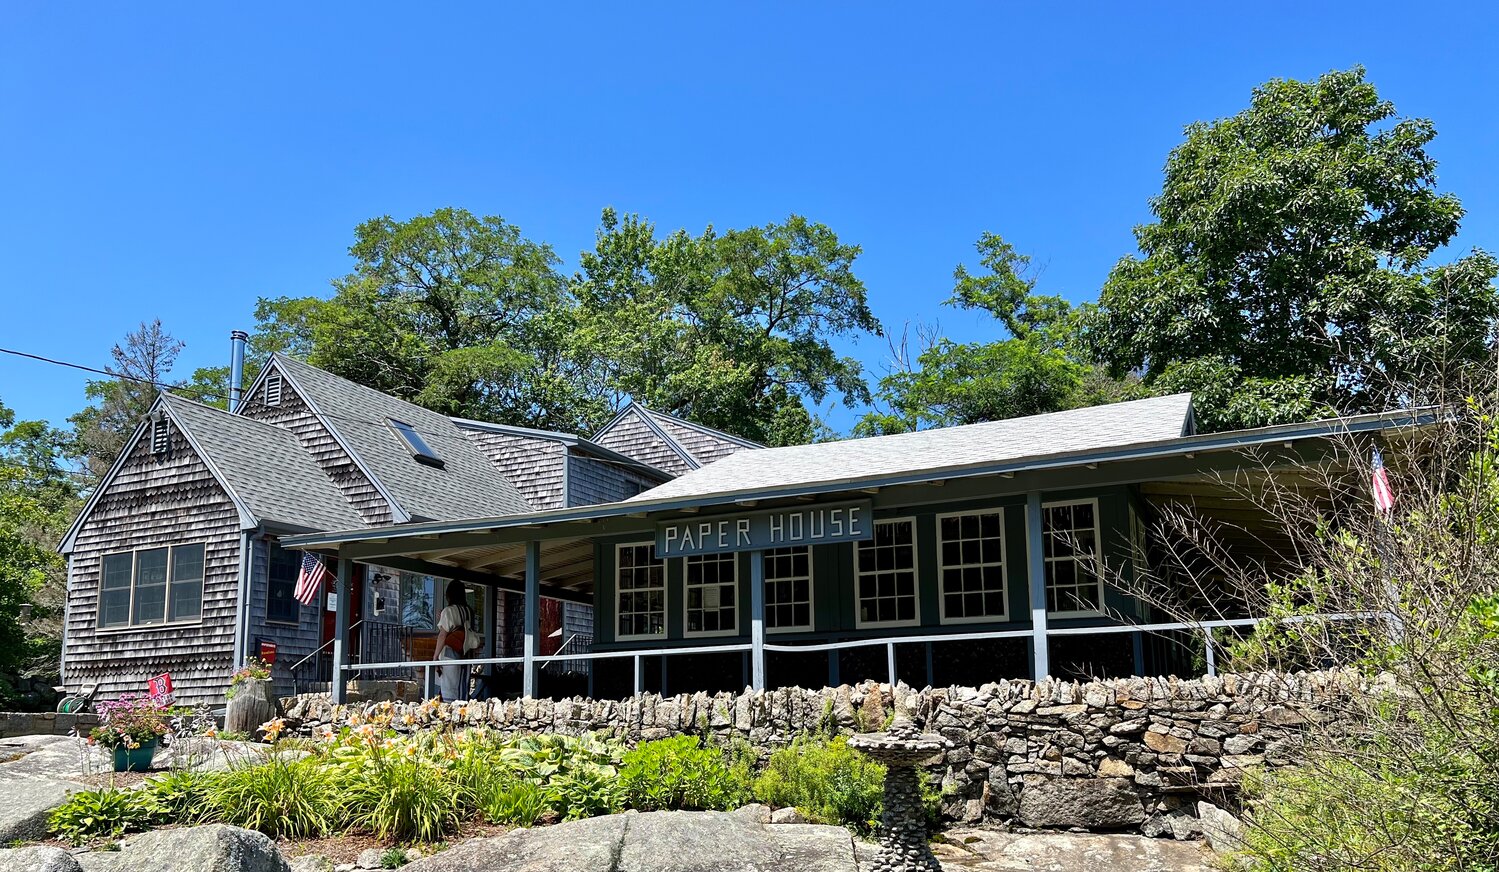 Rockport’s Paper House museum, made of more than 100,000 newspapers in the 1920s by a mechanical engineer from Sweden, still stands and is open to the public.